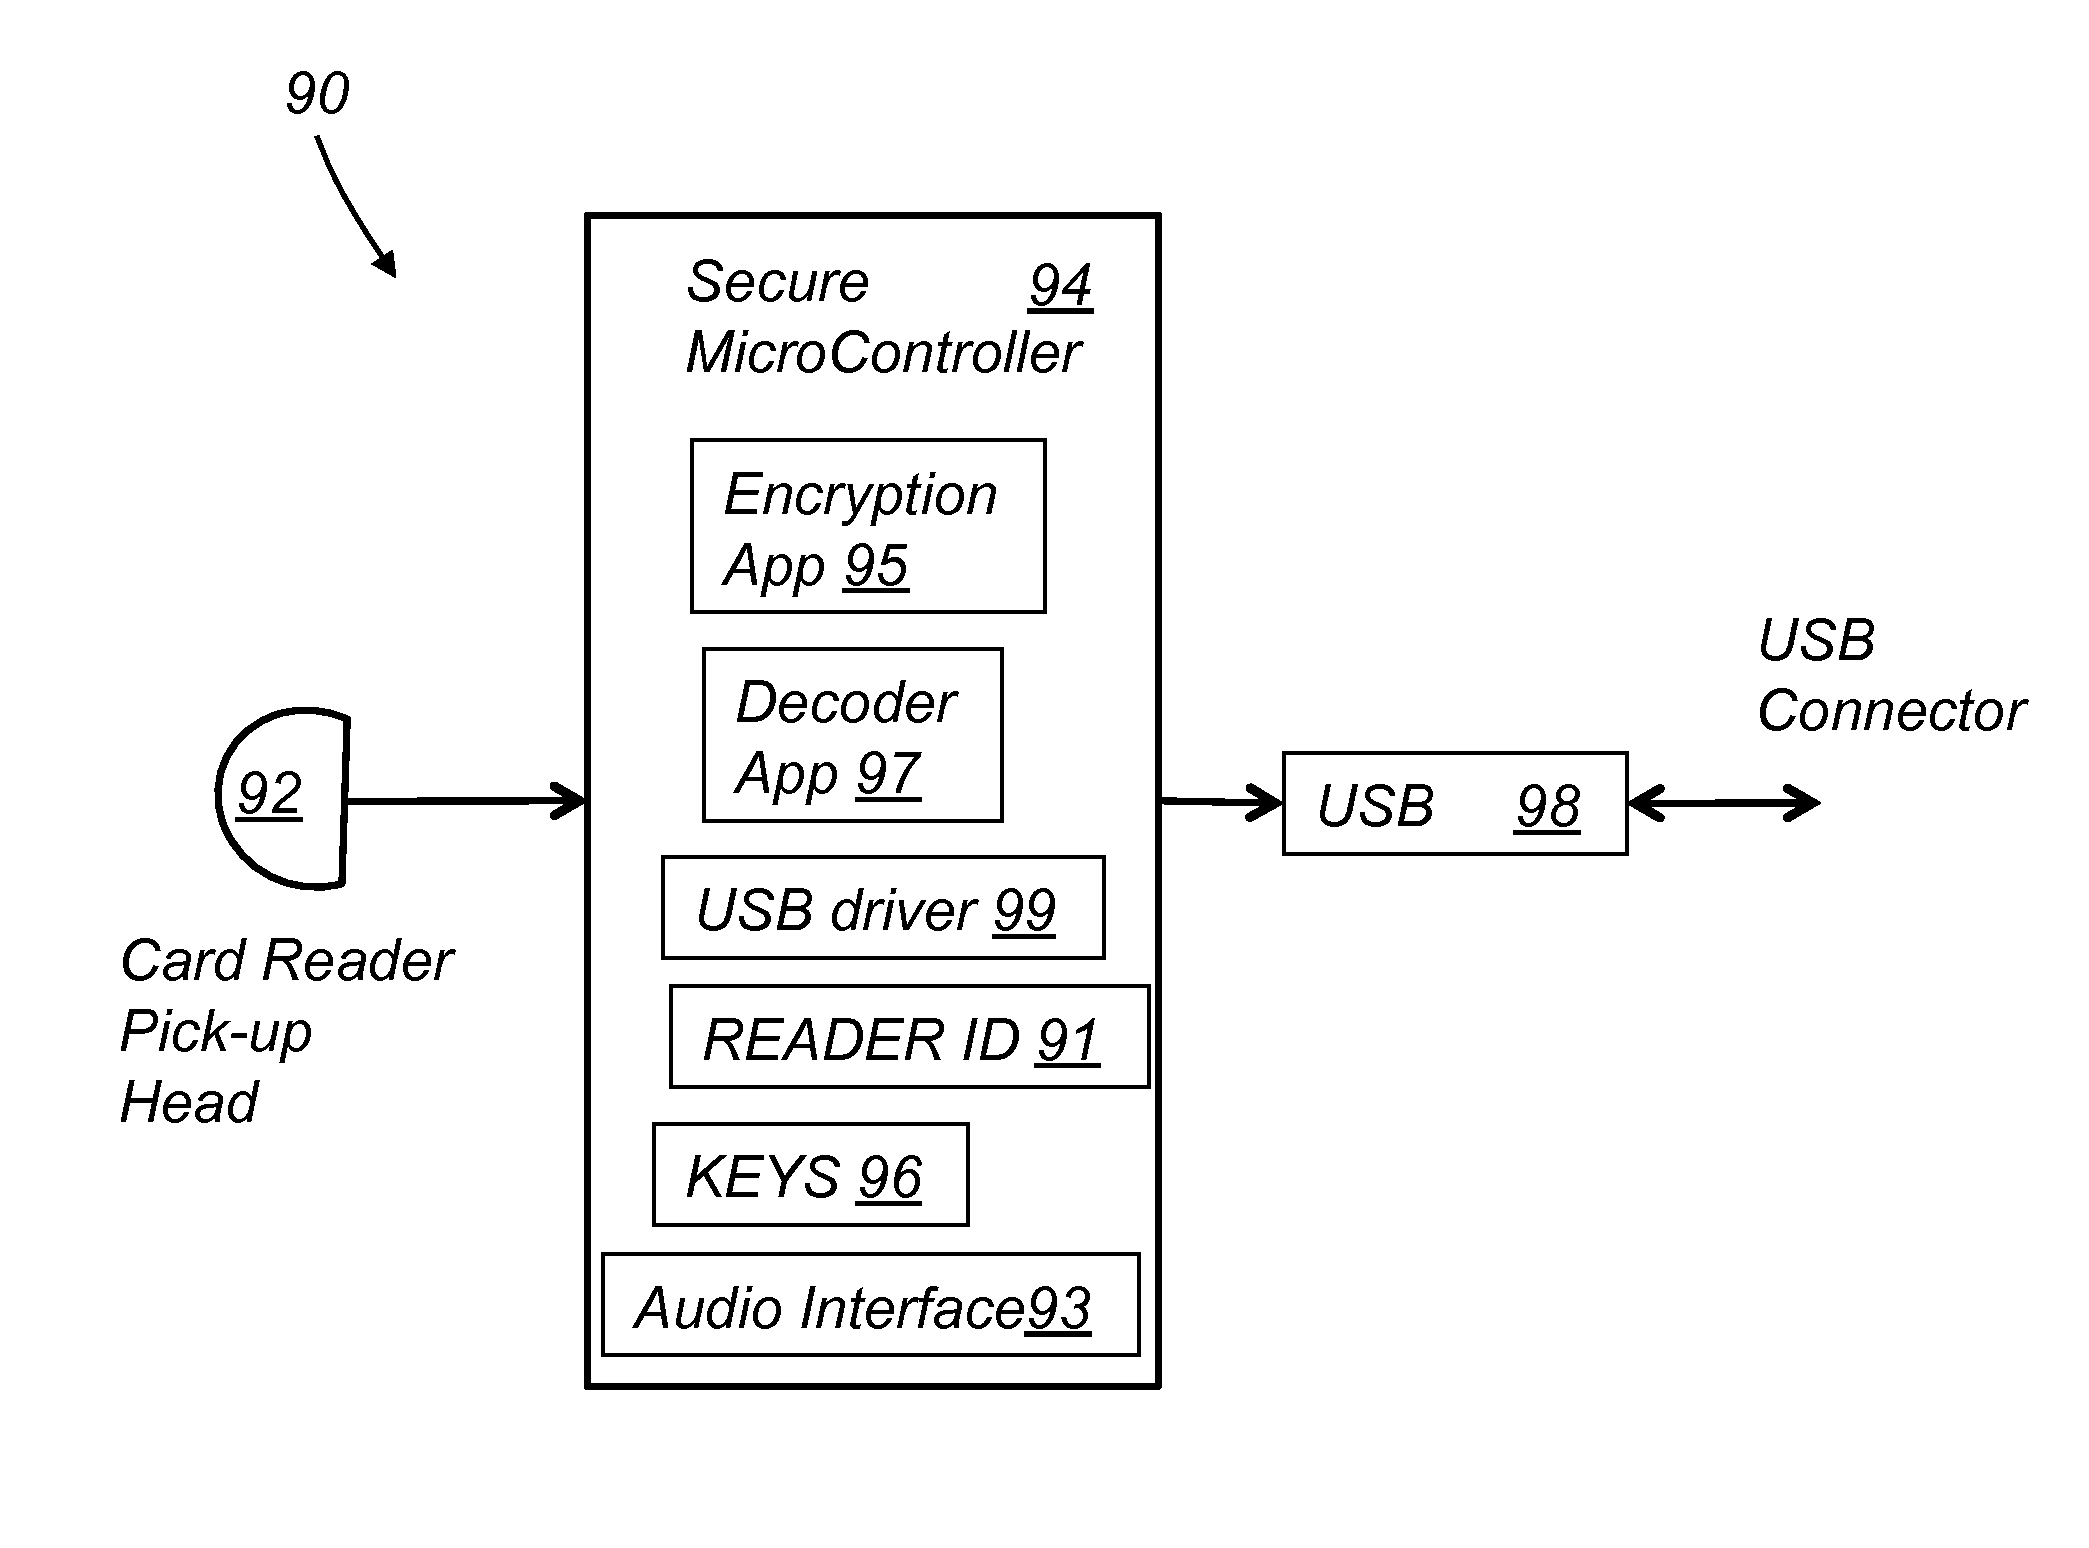 System and method for an authenticating and encrypting card reader